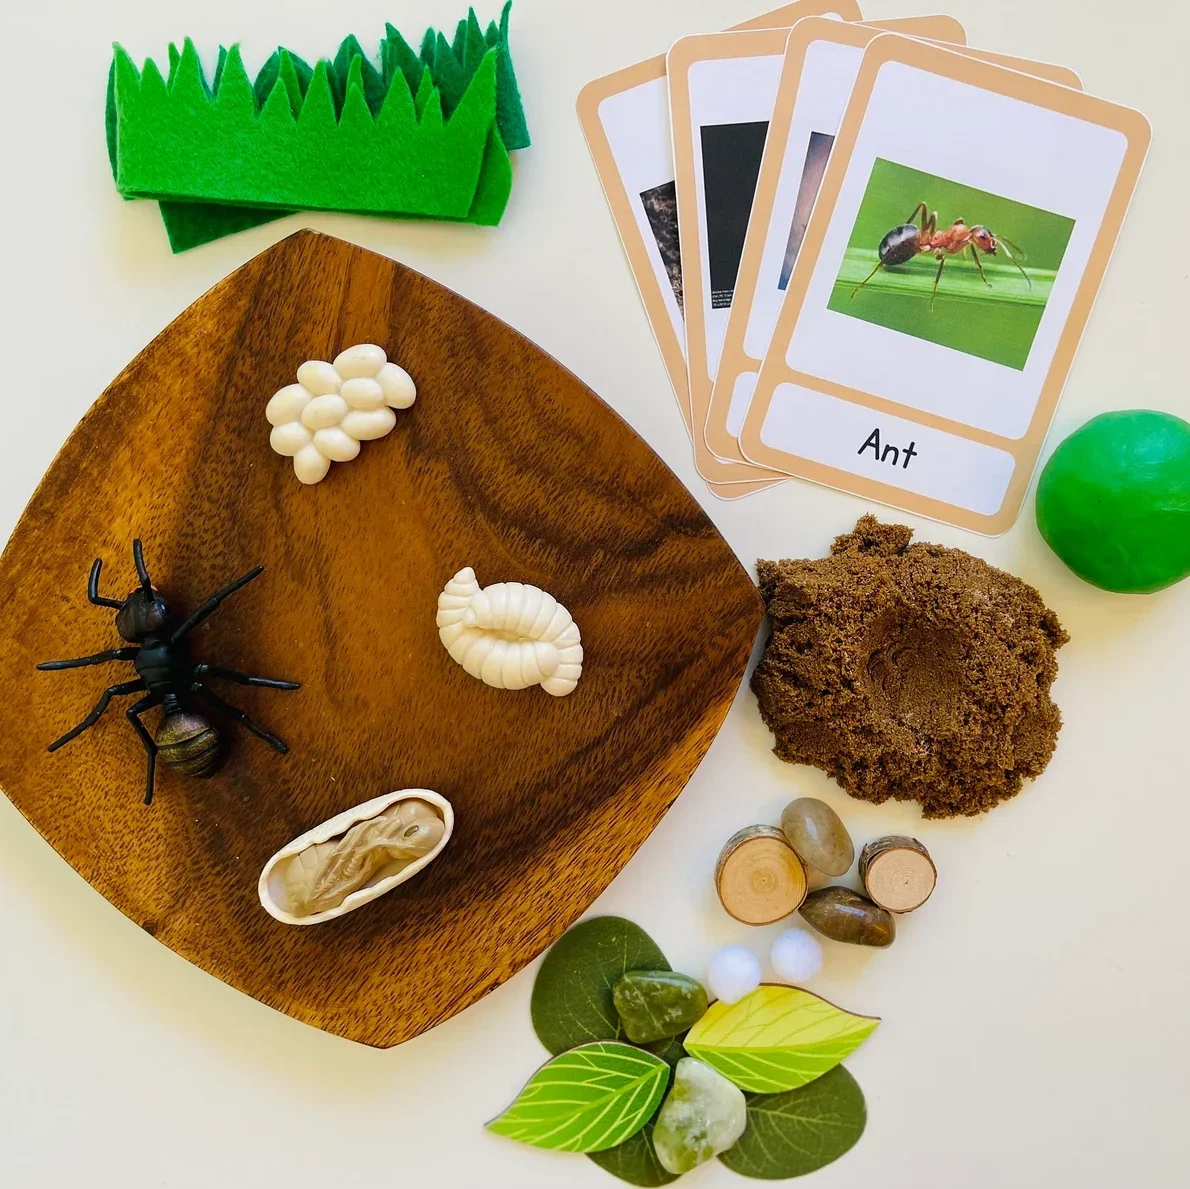 Ant Life Cycle Kit